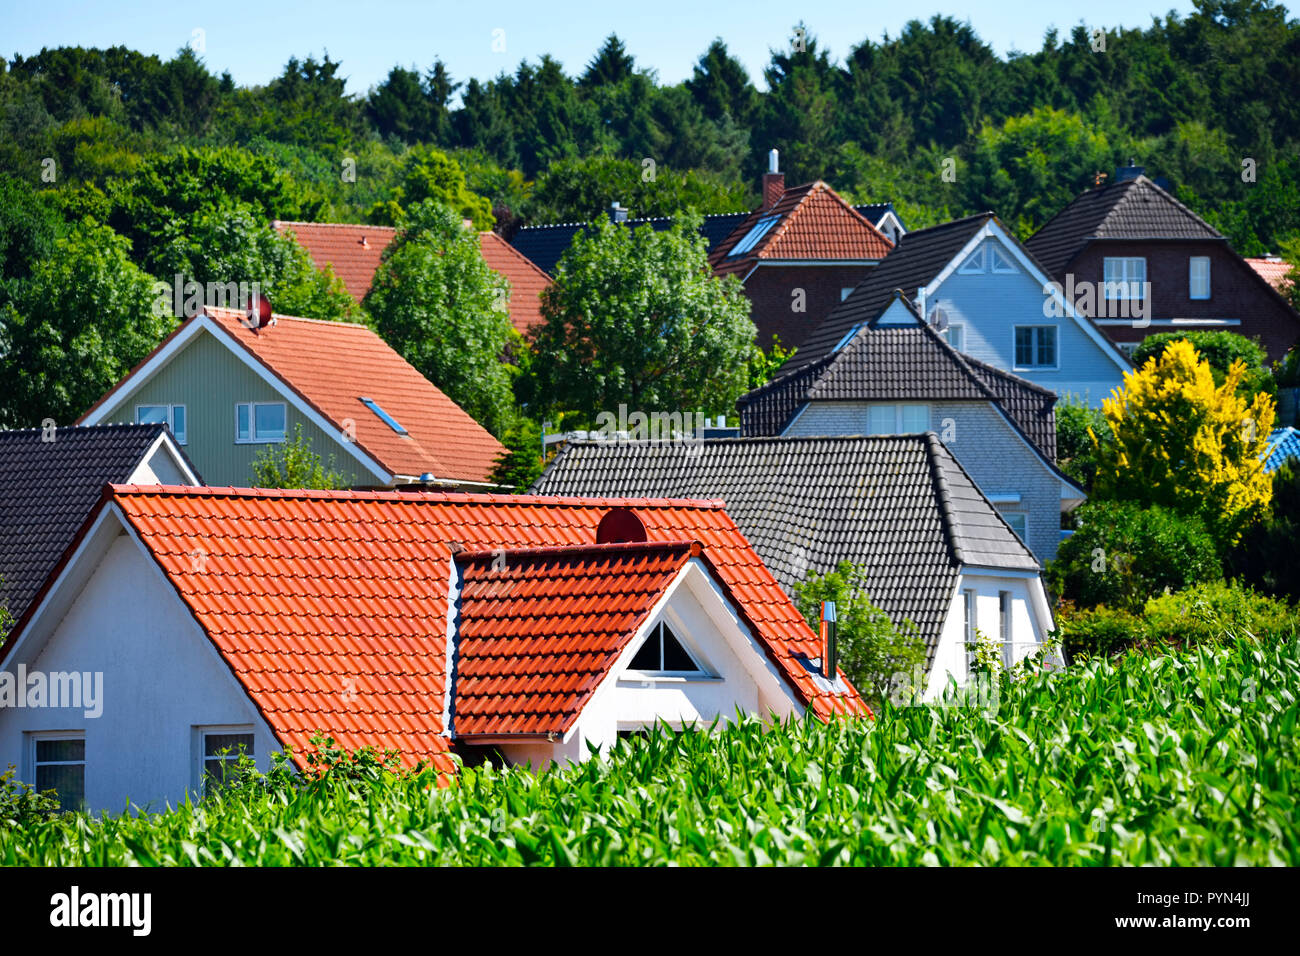 Dwelling houses, residential area in mountain Kling, Schleswig - Holstein, Germany, Wohnhäuser, Wohngebiet in Klingberg, Schleswig-Holstein, Deutschla Stock Photo